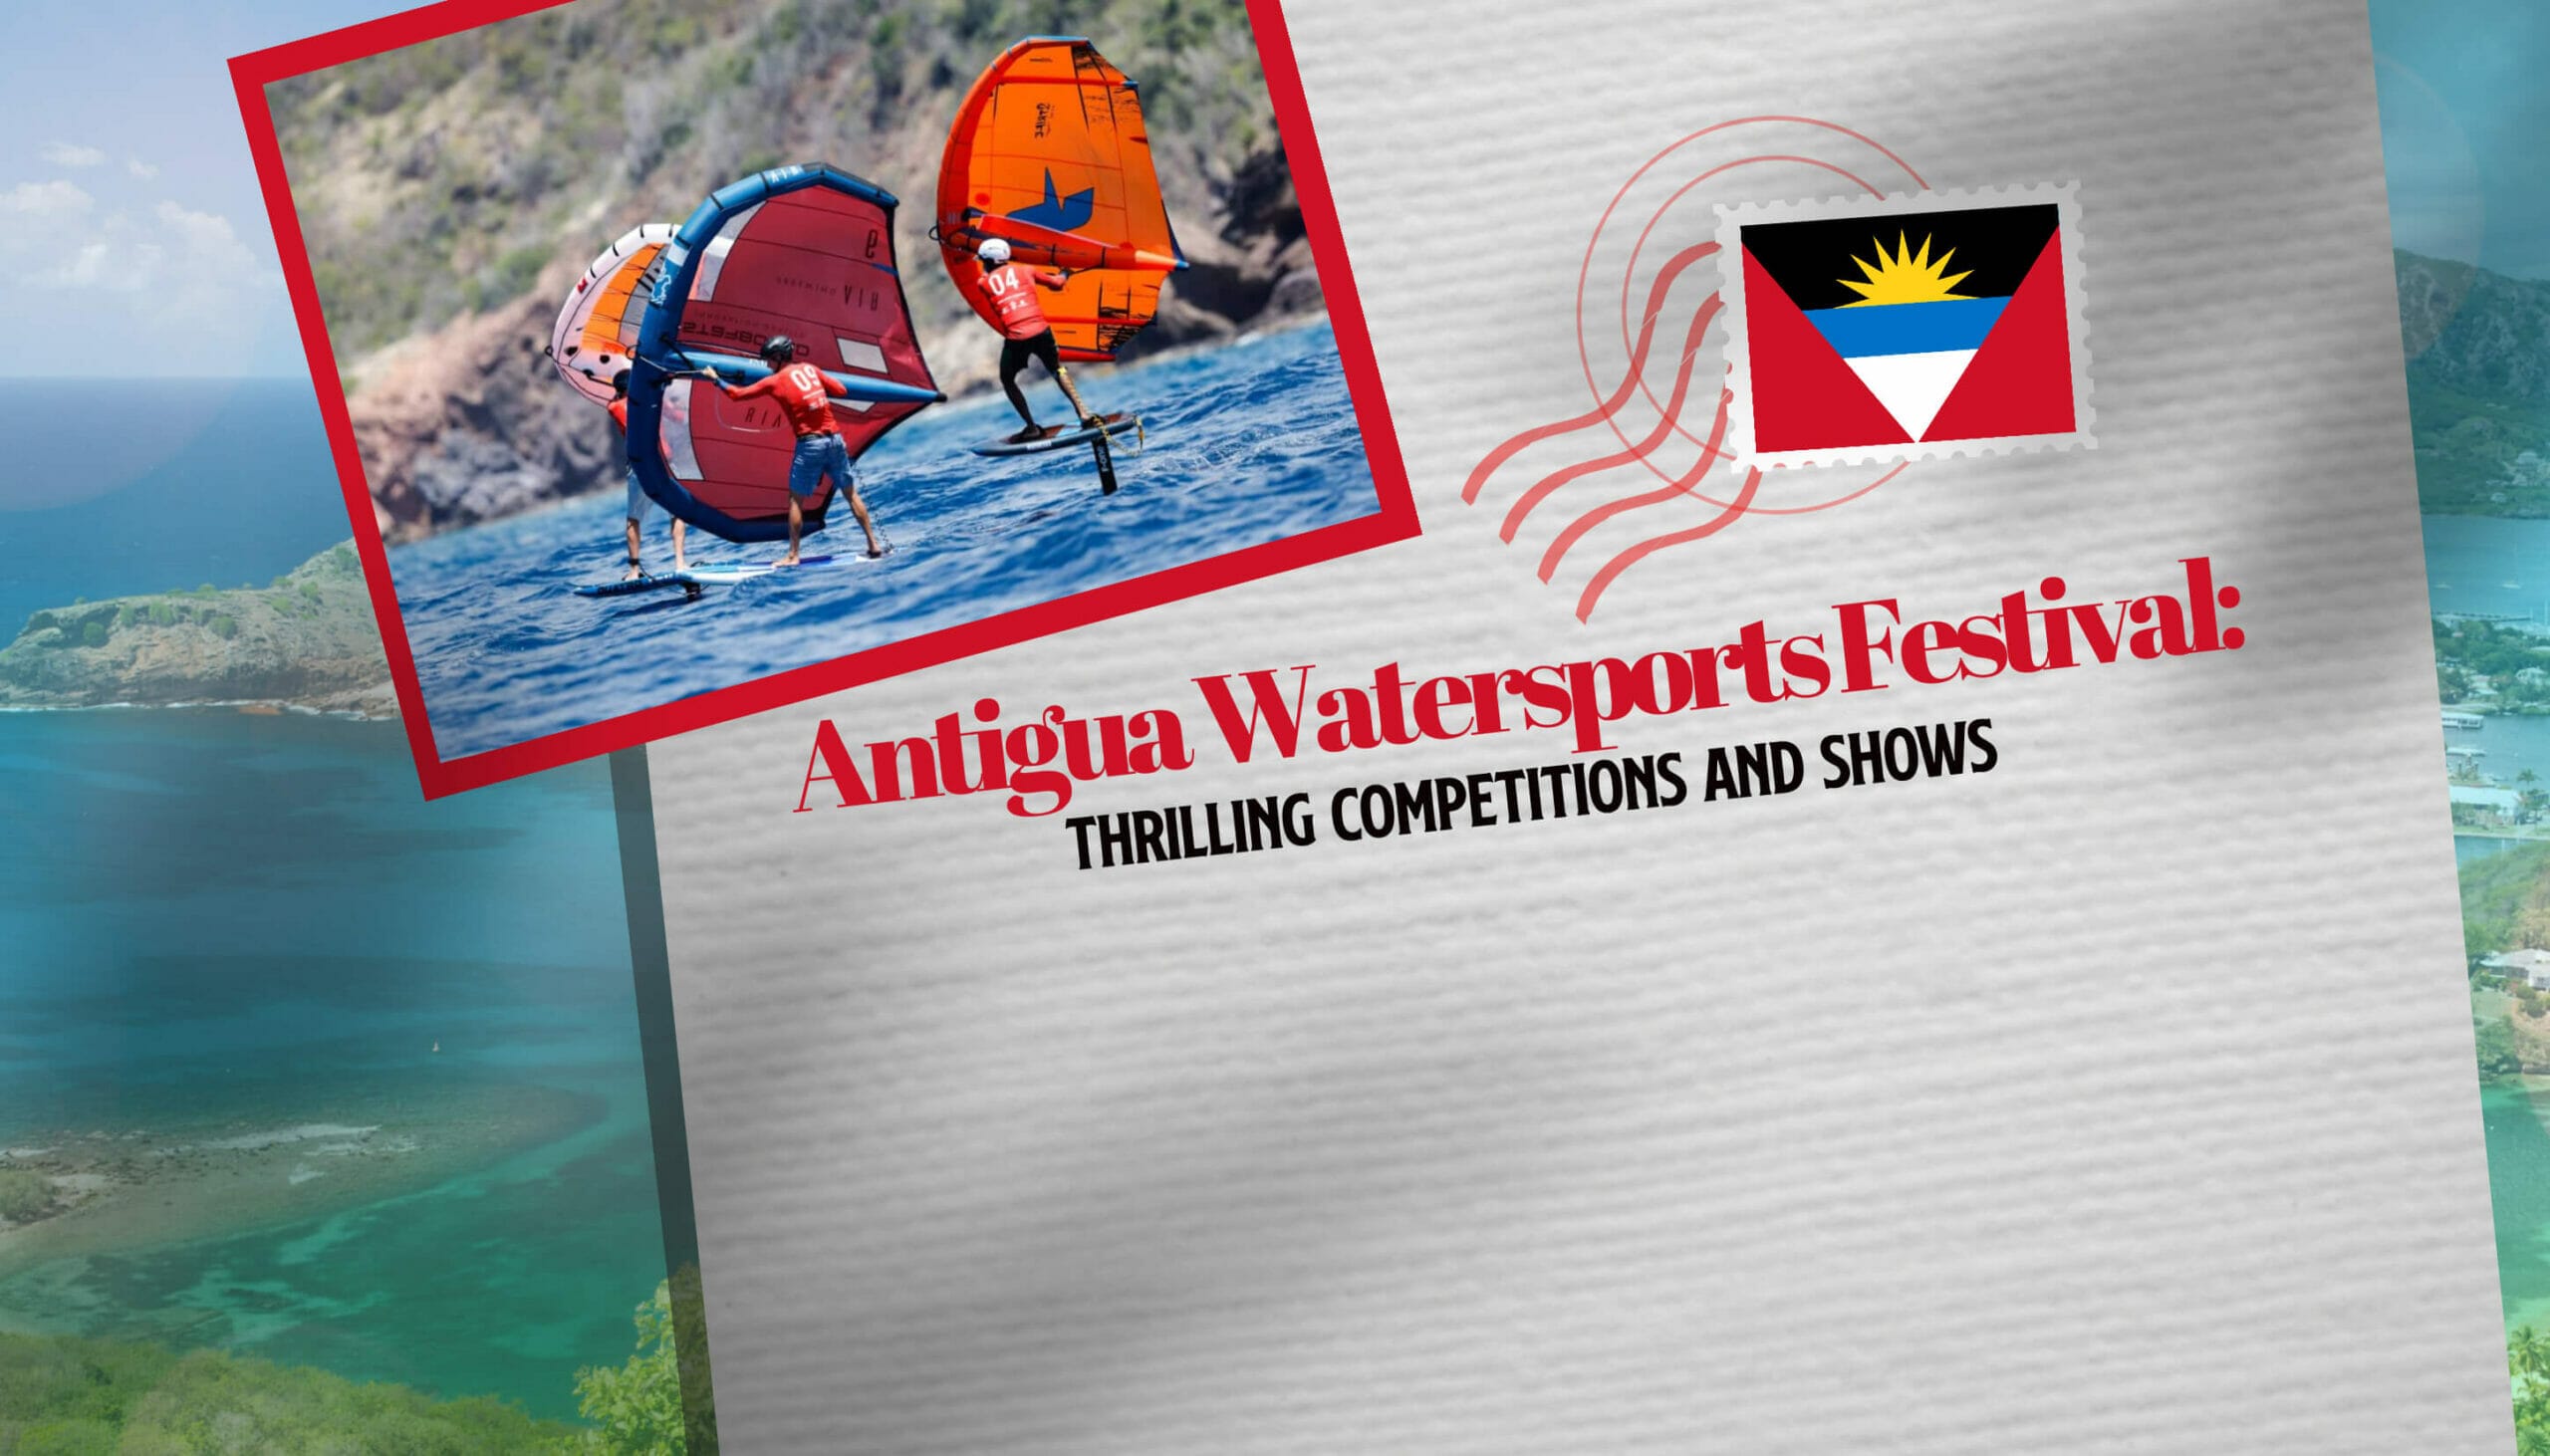 Antigua Watersports Festival Thrilling Competitions and Shows